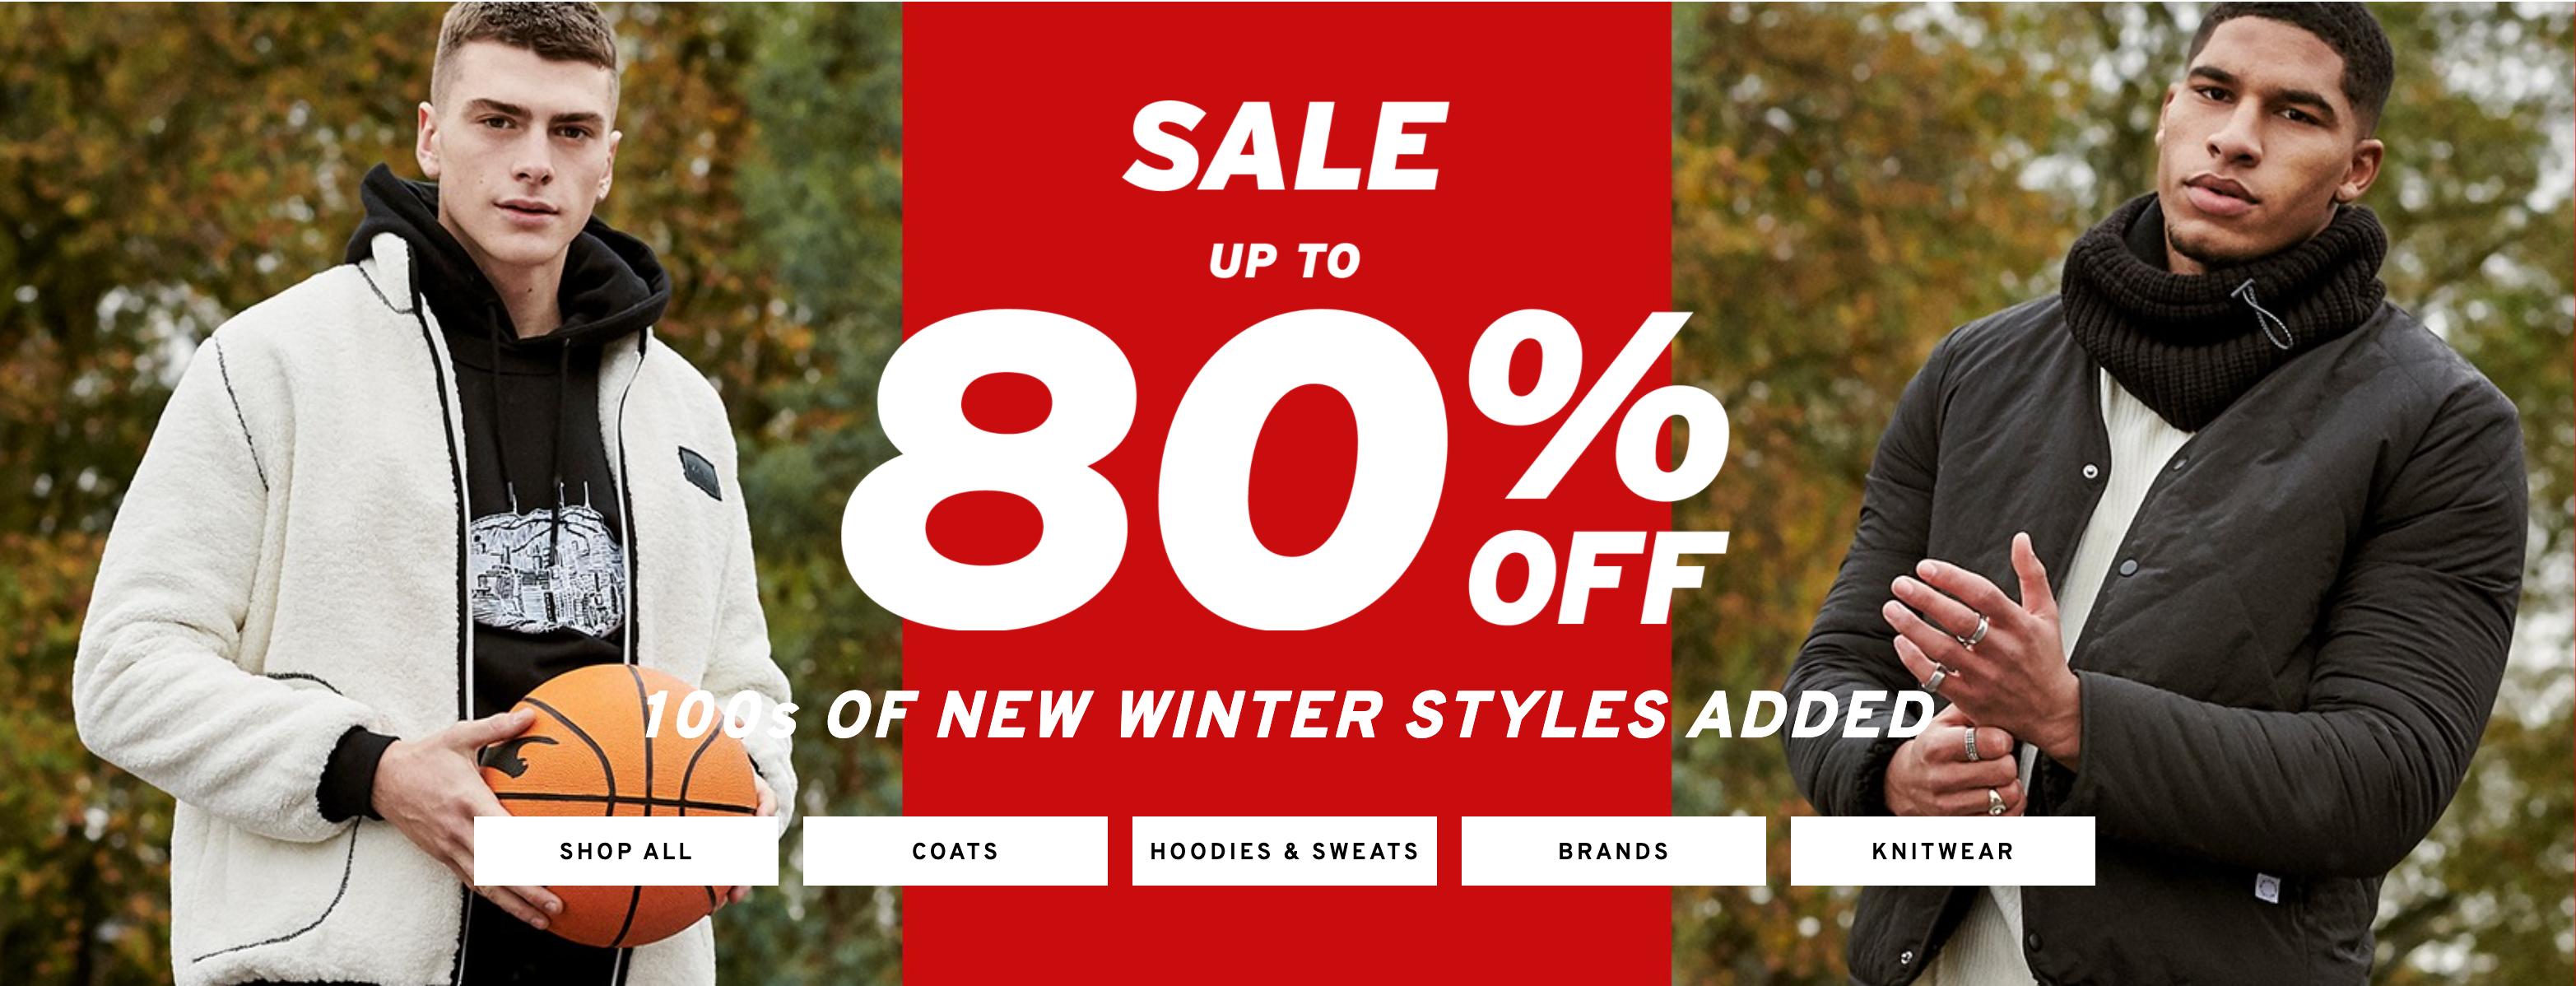 Topman: up to 80% off mens fashion